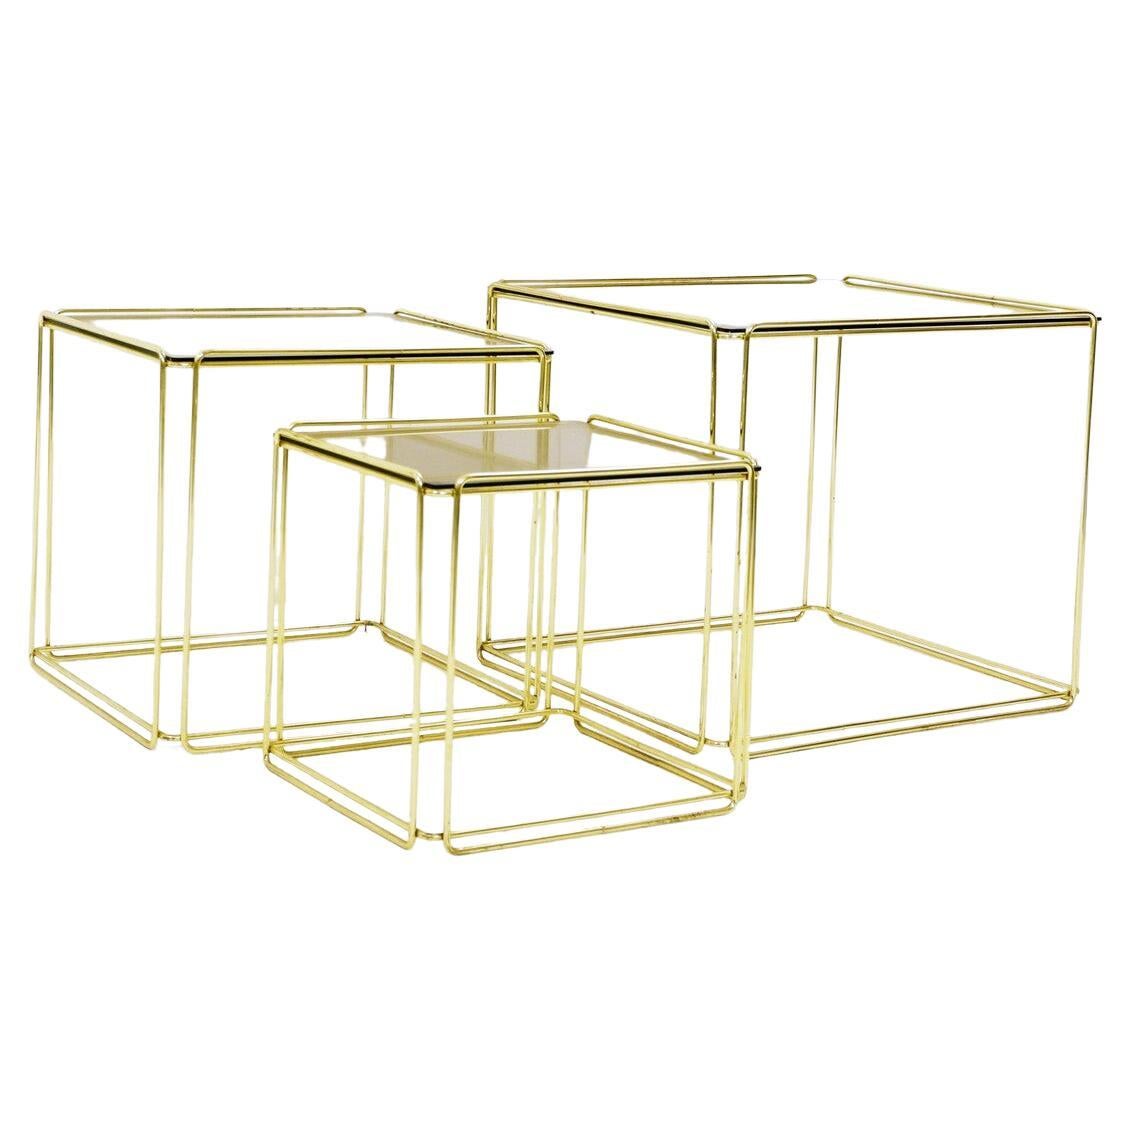 Set of three ‘Isoce`le’ gold nesting tables by Max Sauze in for Atrow. 1970s.